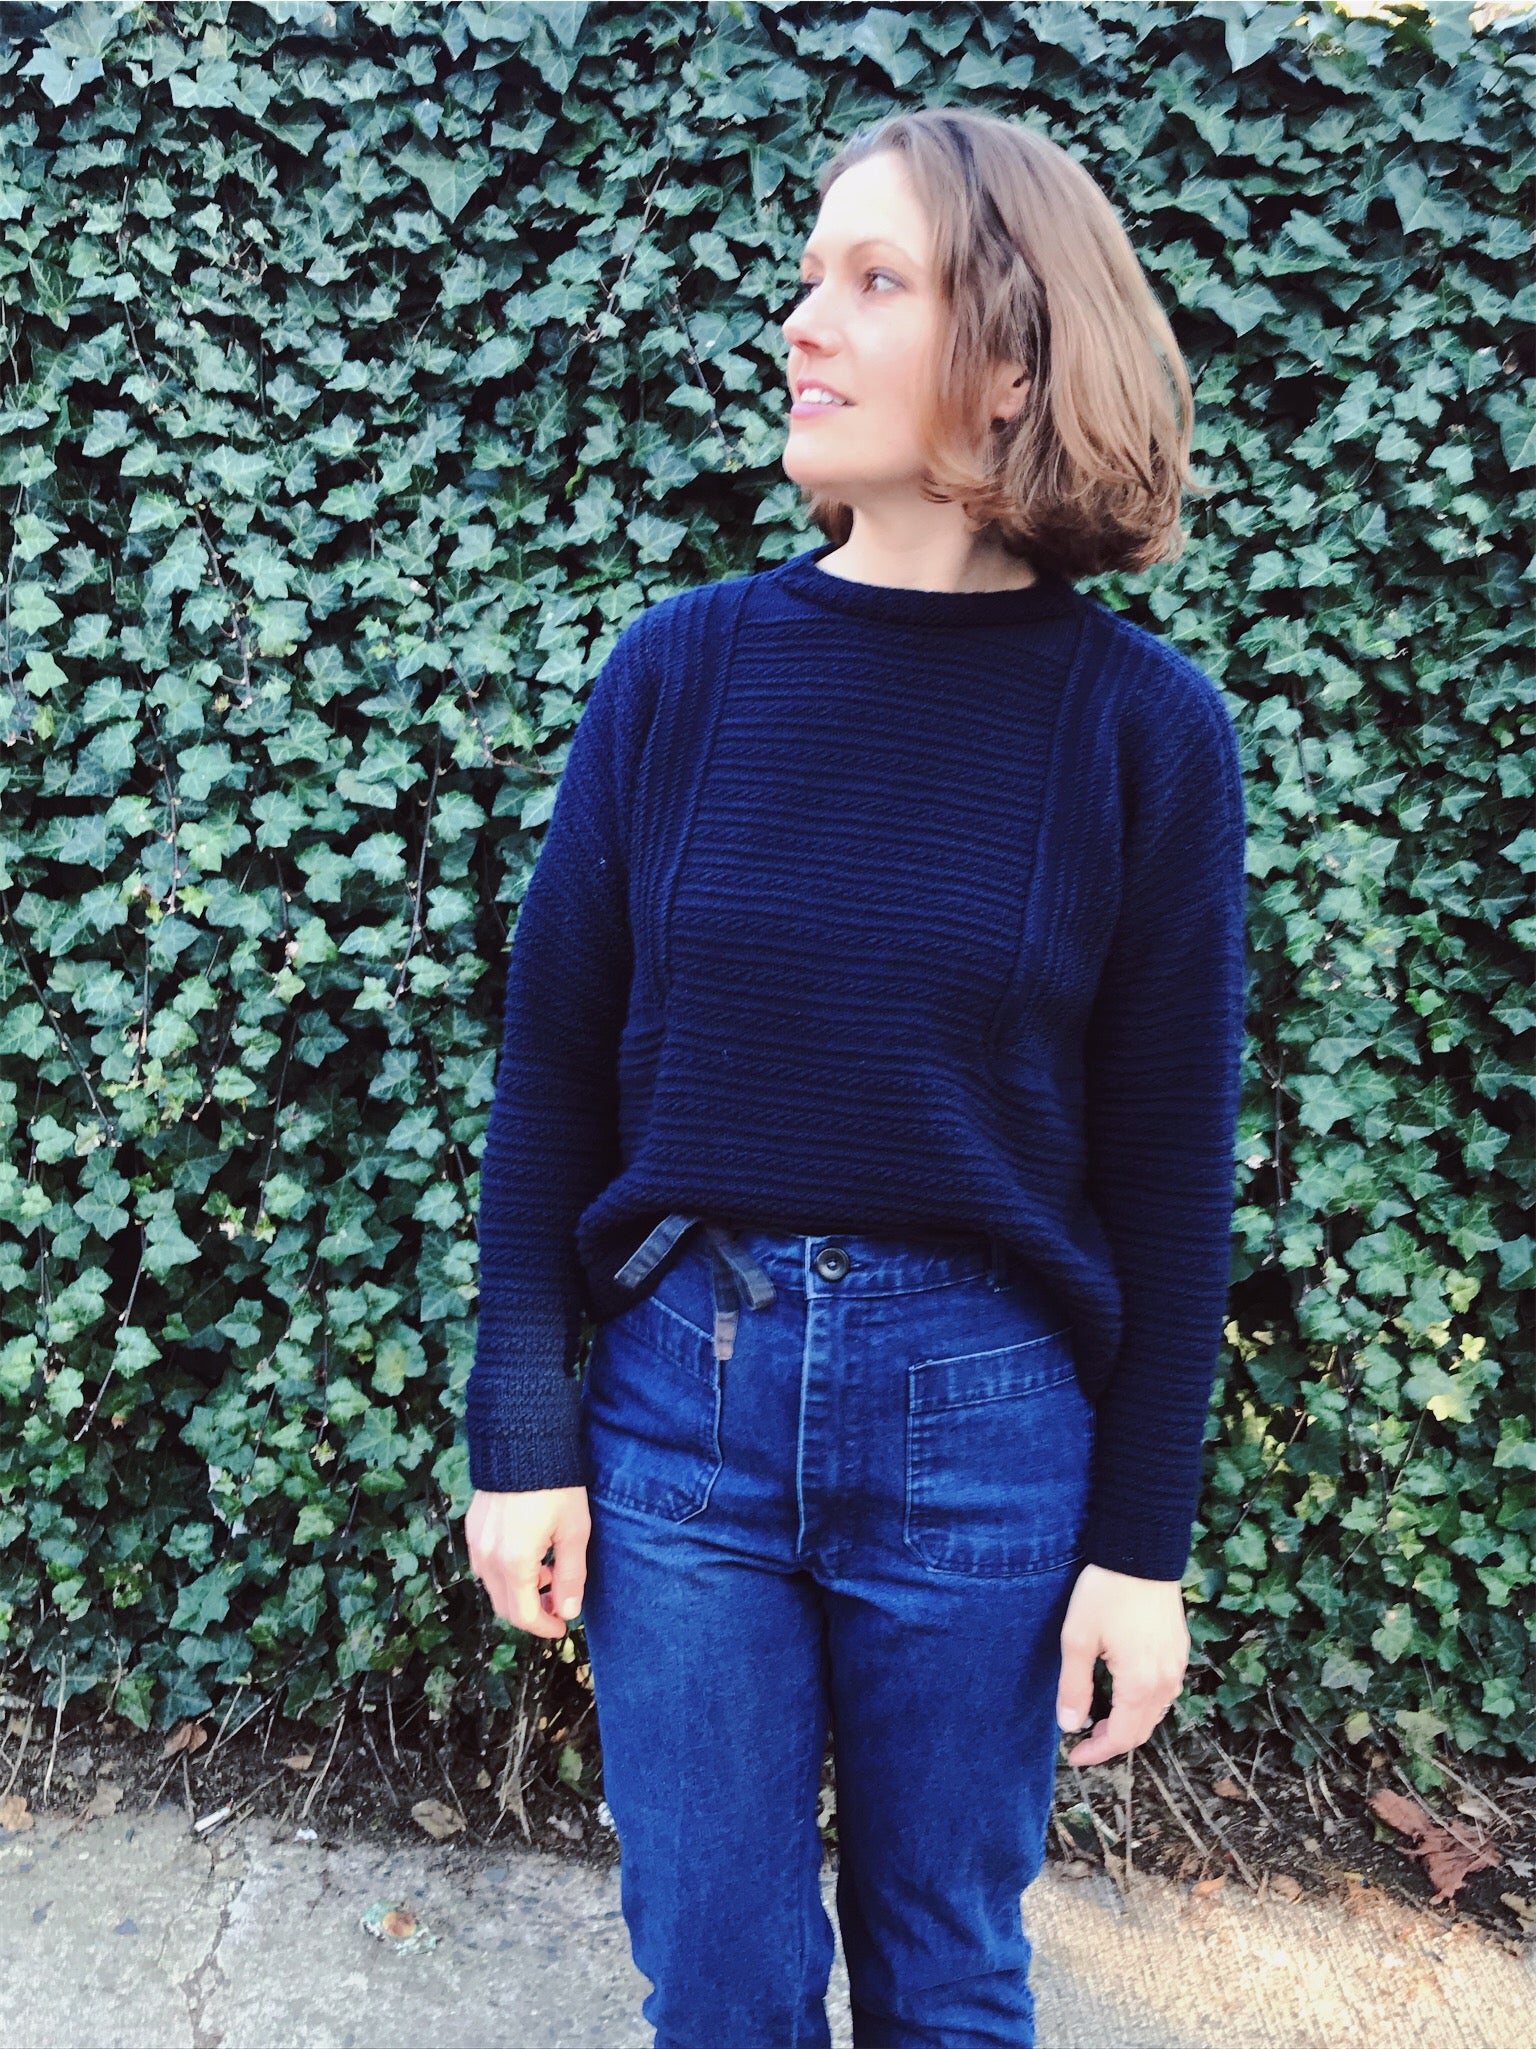 lis wearing her hand knit wool weidlinger sweater